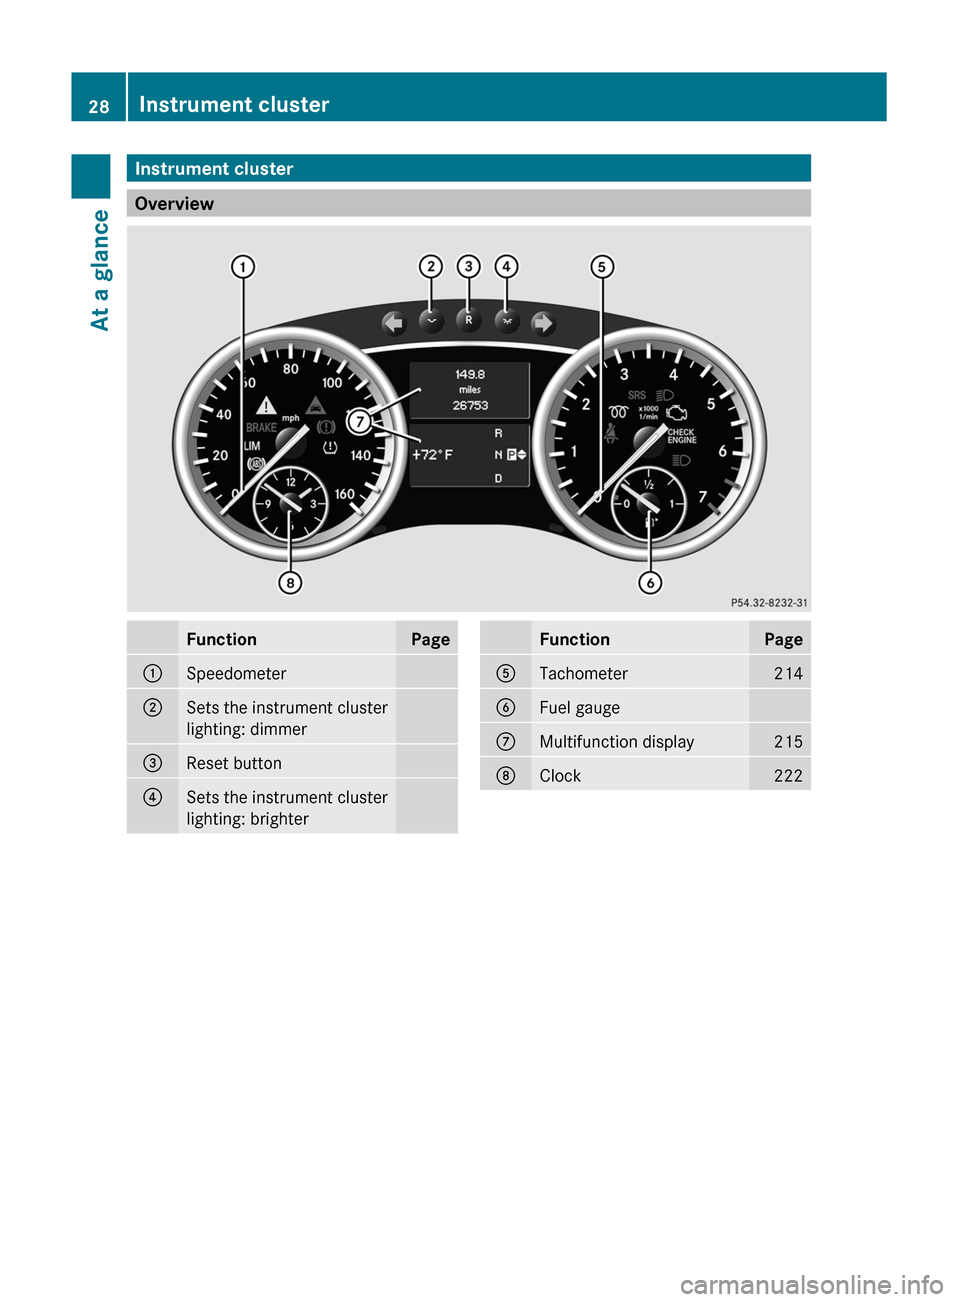 MERCEDES-BENZ GL350 BlueTEC 2011 X164 Owners Manual Instrument cluster
Overview
FunctionPage:Speedometer;Sets the instrument cluster
lighting: dimmer=Reset button?Sets the instrument cluster
lighting: brighterFunctionPageATachometer214BFuel gaugeCMulti